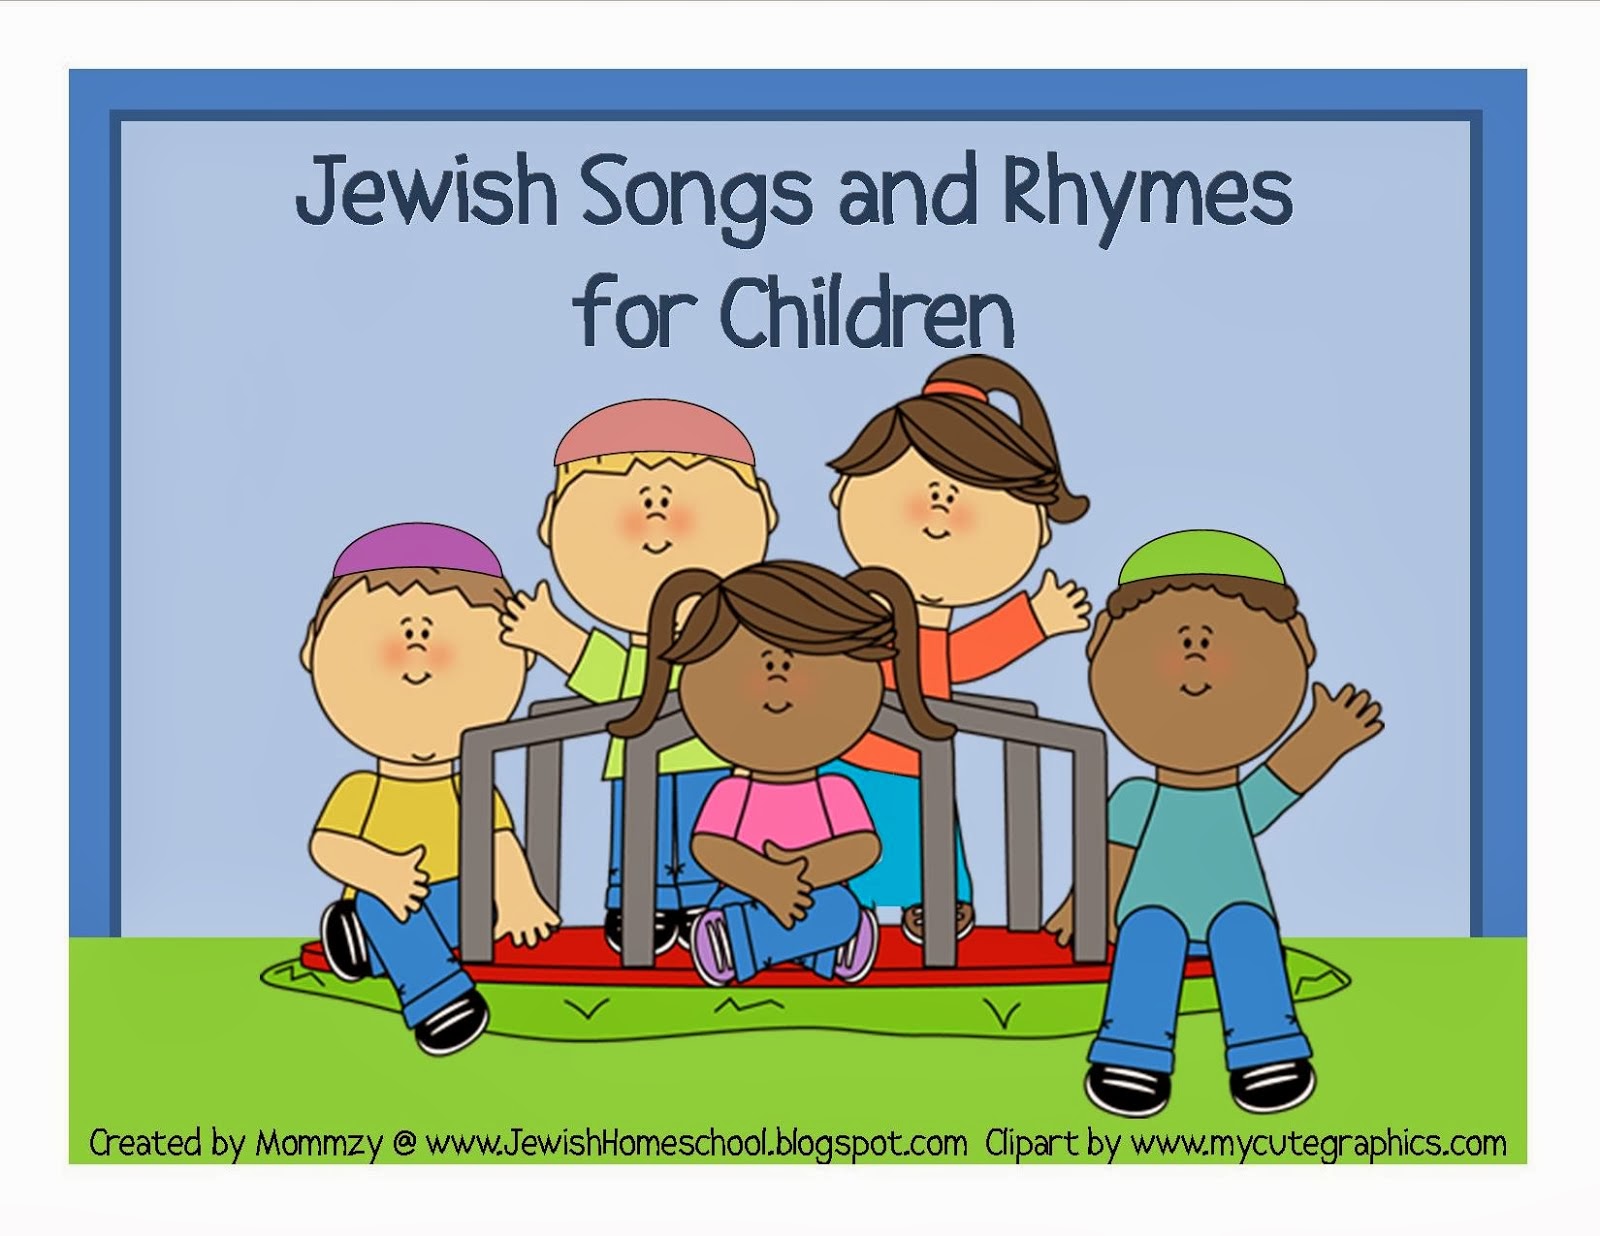 FREE Jewish Songs and Rhymes for Children